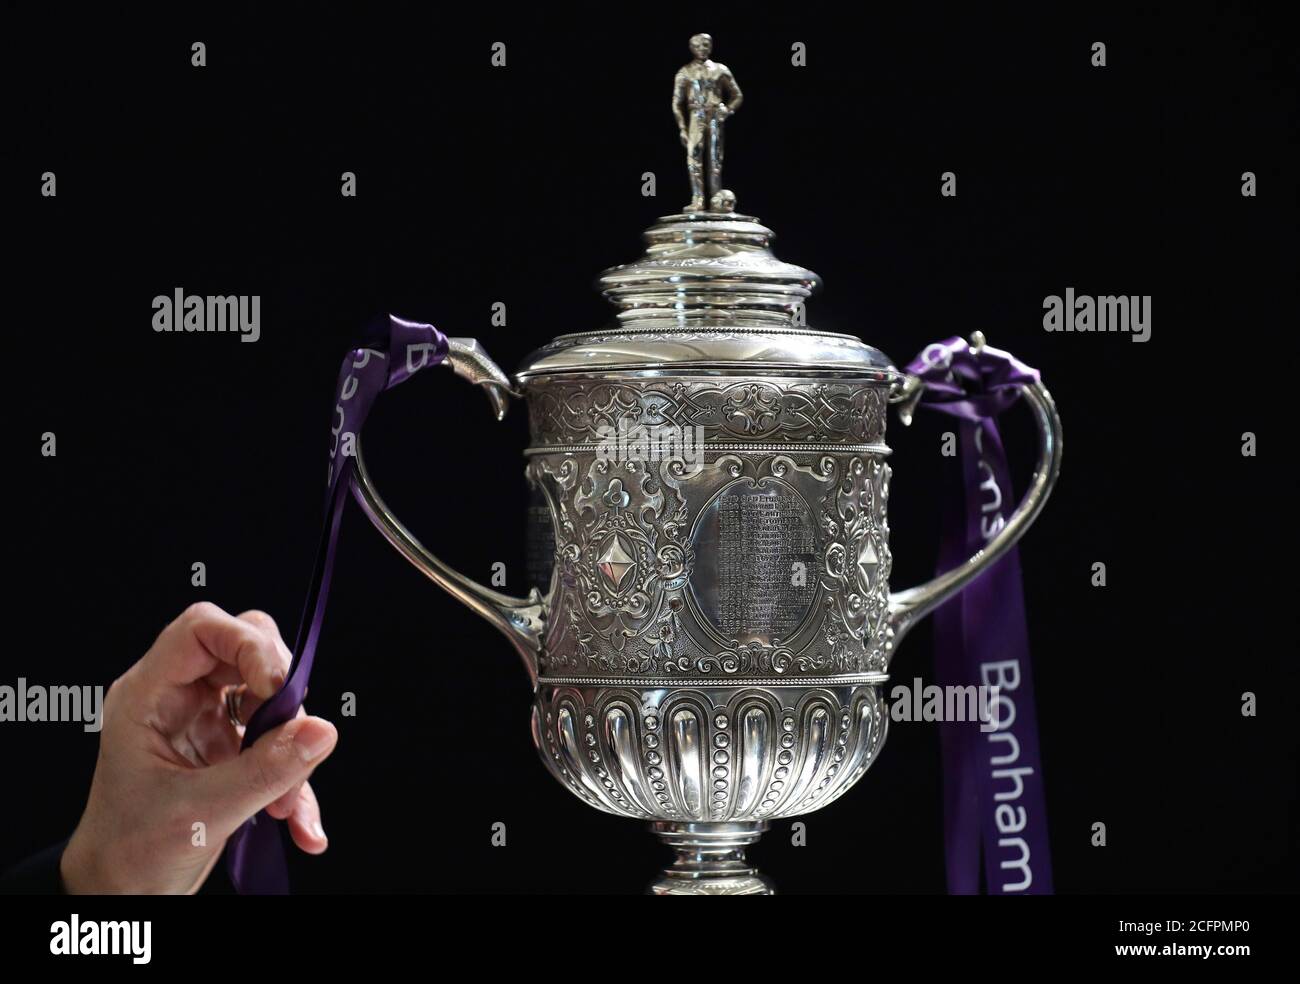 Tthe oldest surviving FA Cup trophy during a preview of the Sporting Trophies Sale at which will take place as Bonhams New Bond Street saleroom on September 29. The silver two-handled cup, estimated at GBP 700,000 -900,000, was made by Vaughton and Sons of Birmingham in 1896, and was presented to the FA Cup winning teams between 1896 and 1910, including Manchester United, Manchester City, Everton, Newcastle United and Tottenham Hotspur. Stock Photo